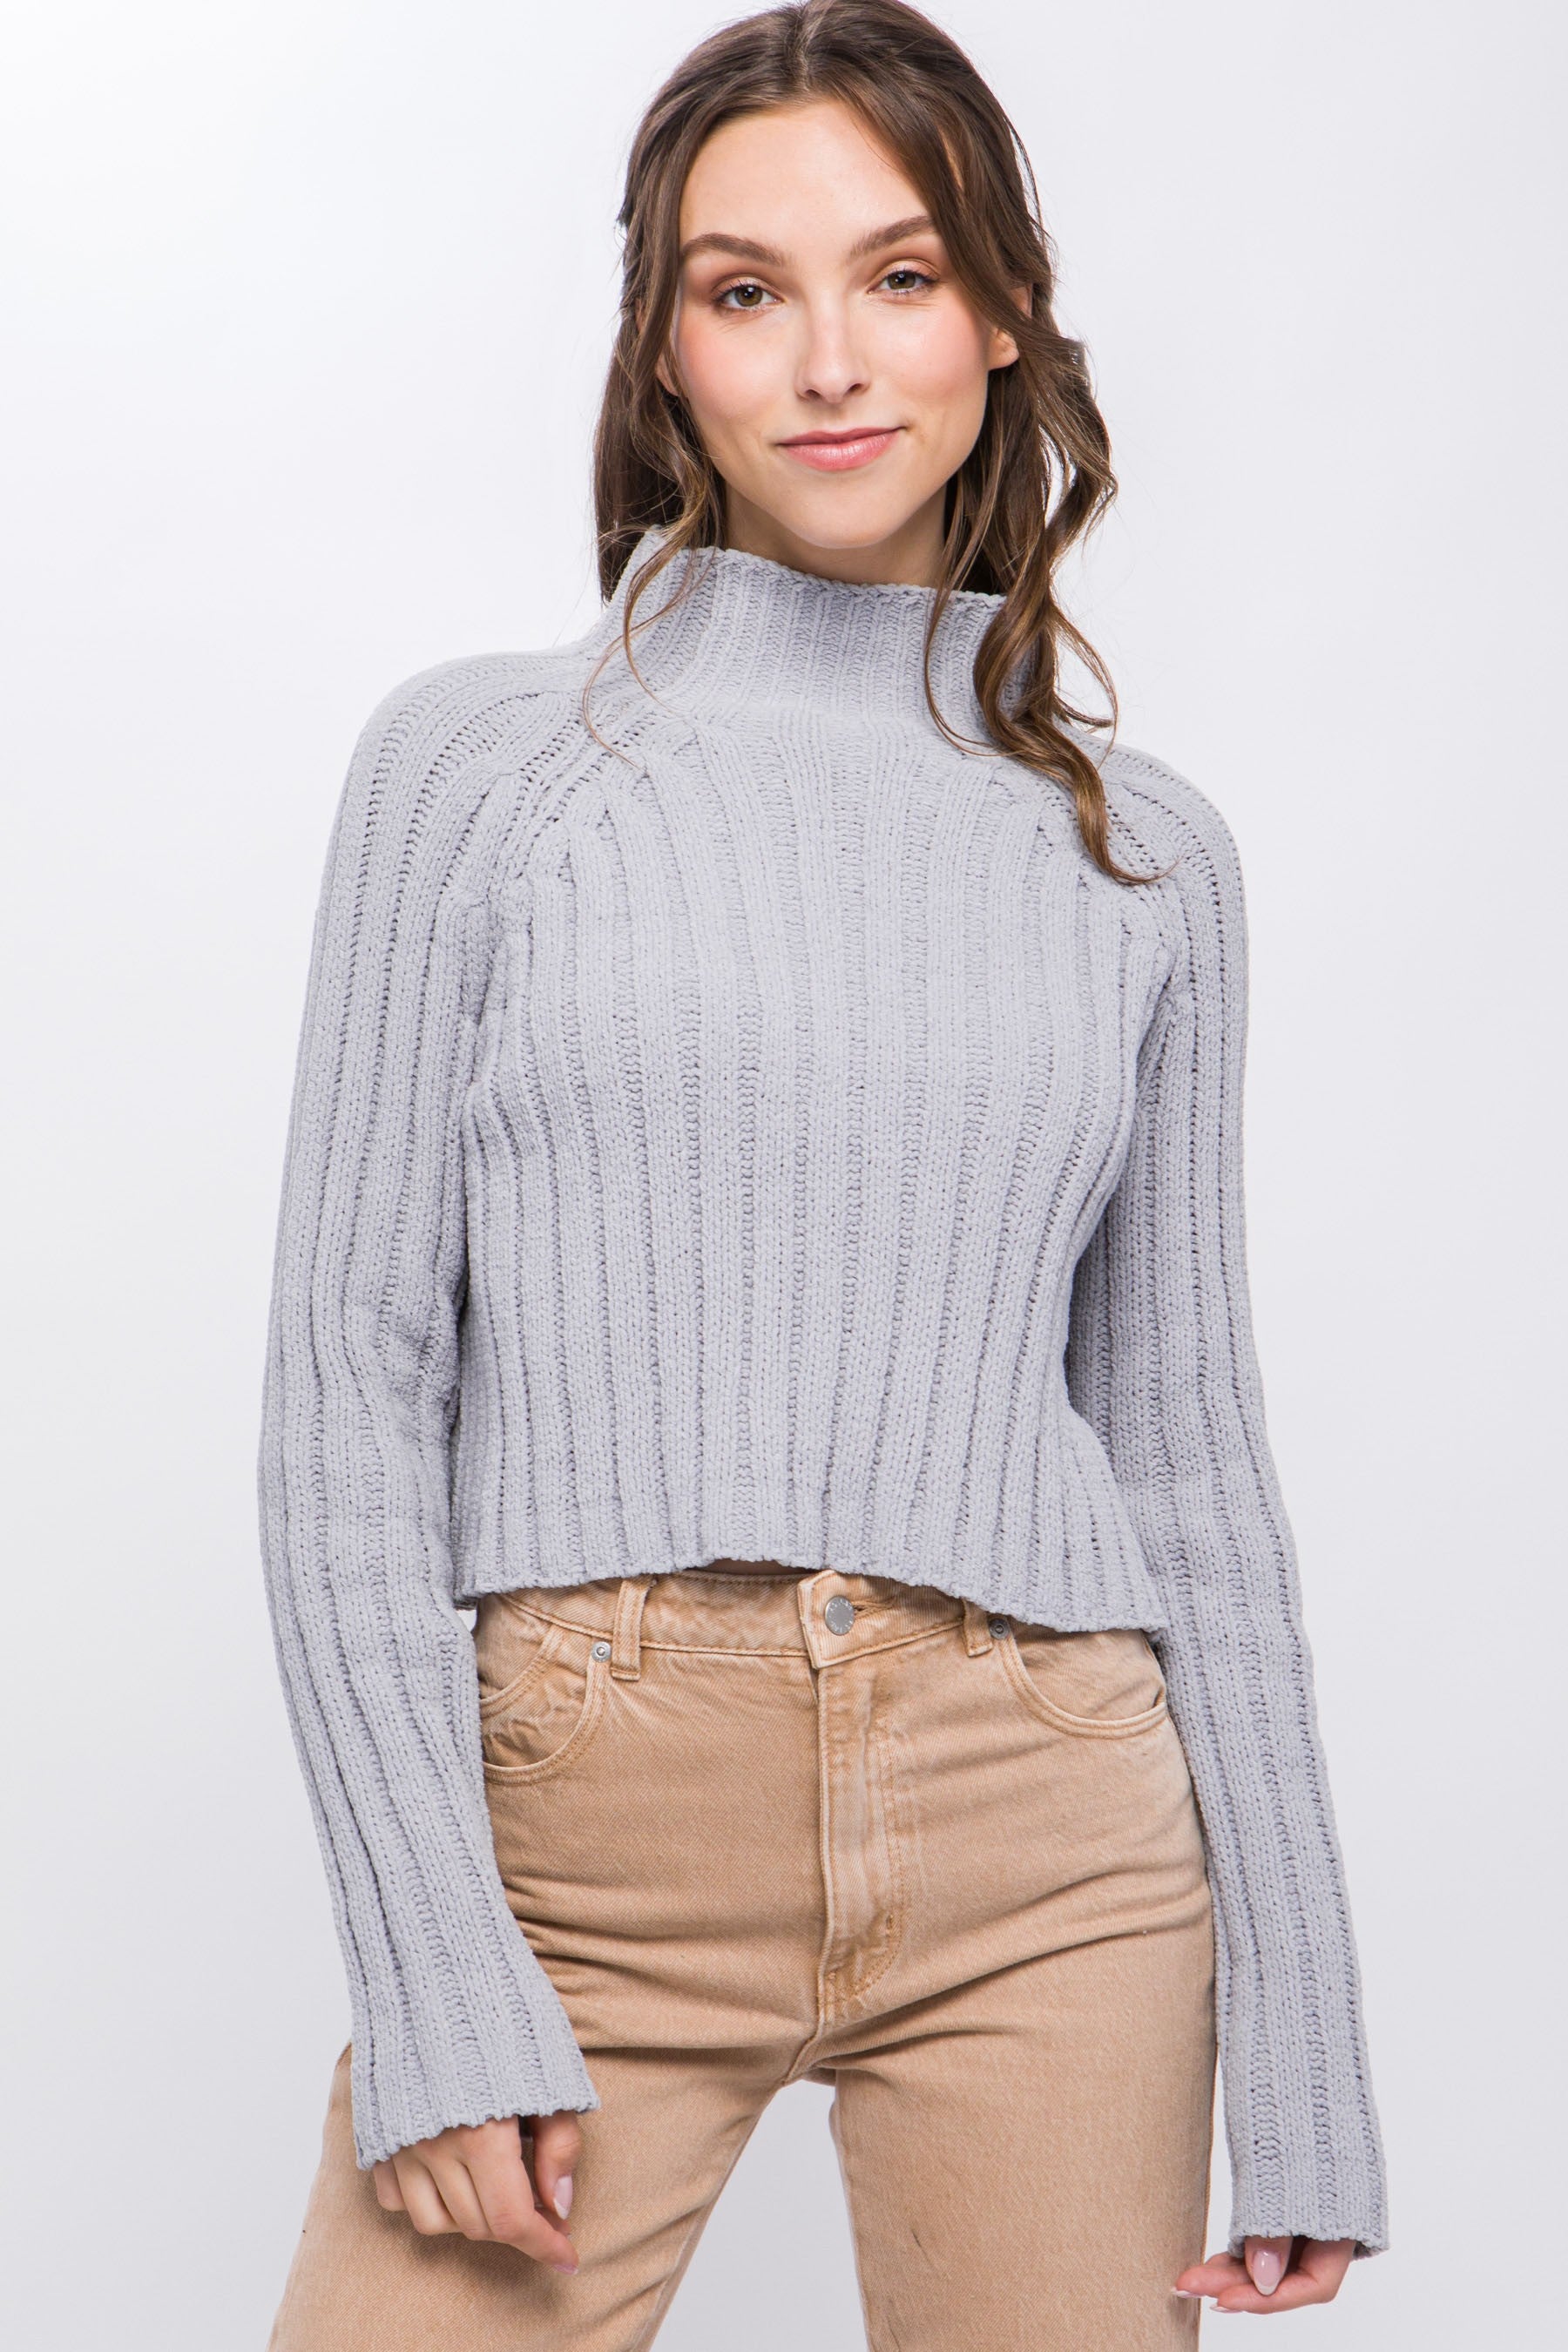 The Taylor High Neck Knit Pullover Sweater